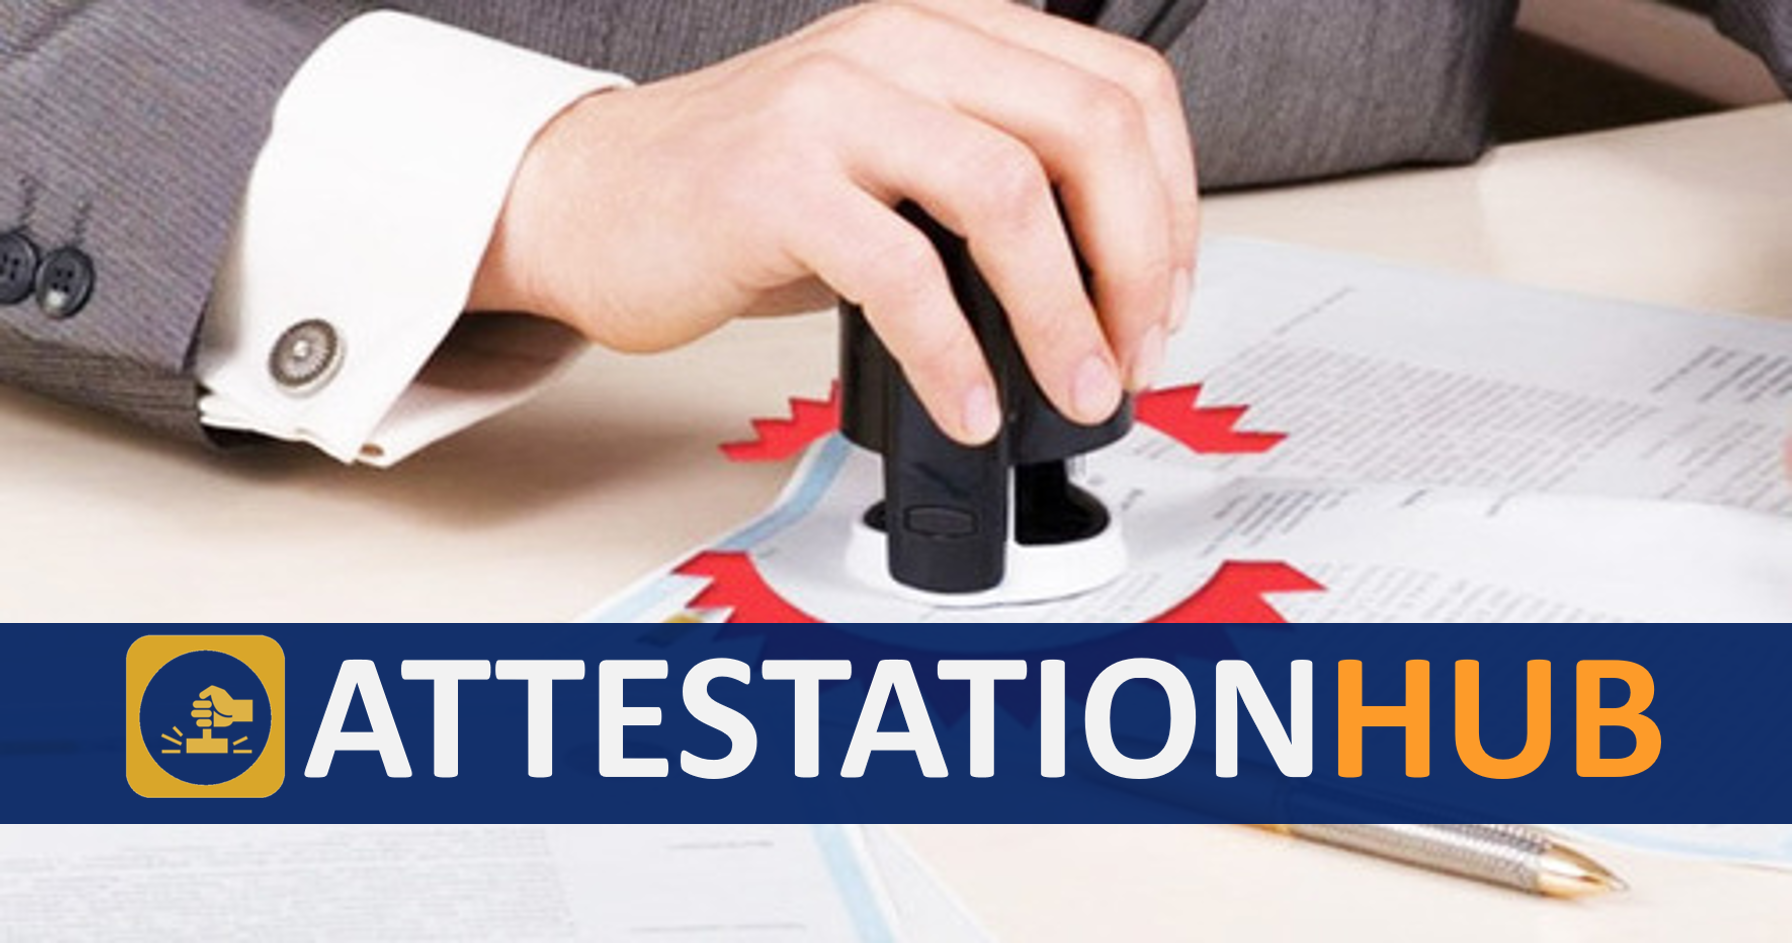 Kuwait Embassy Attestation | Quality & Trusted Services - Attestation Hub | 100% Recommend